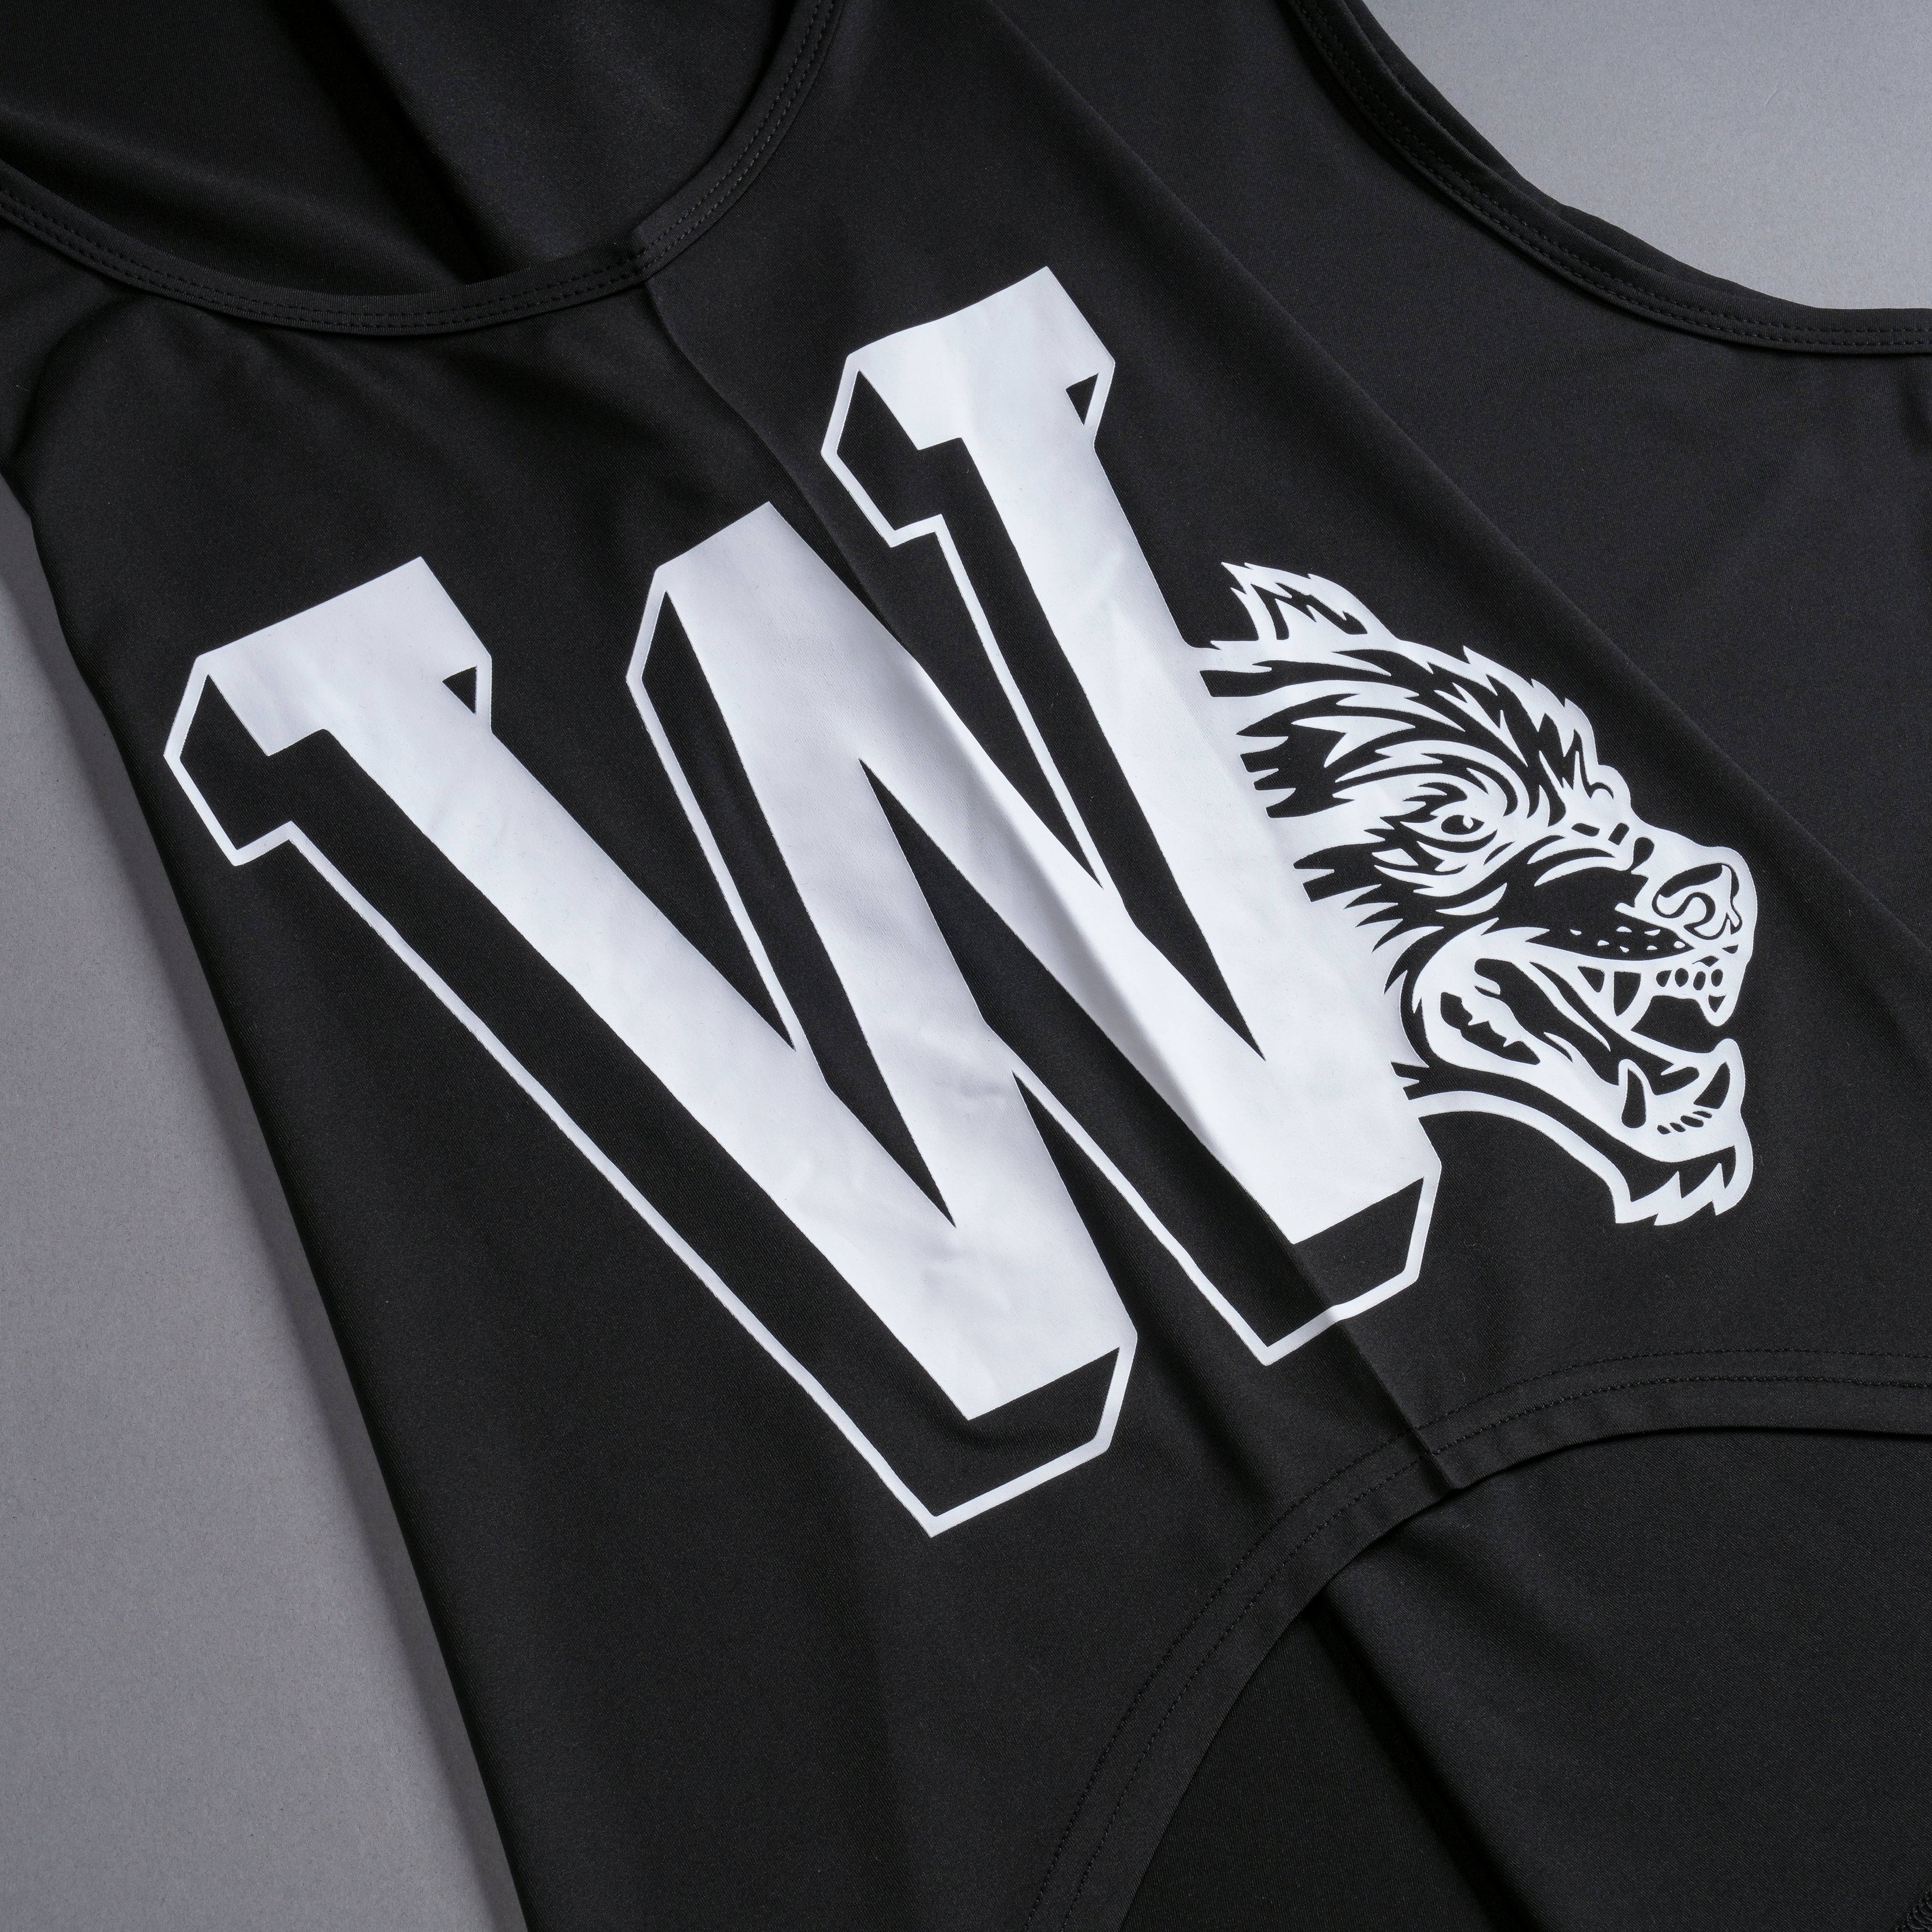 Our Stamp "Dry Wolf" (Drop) Tank in Black